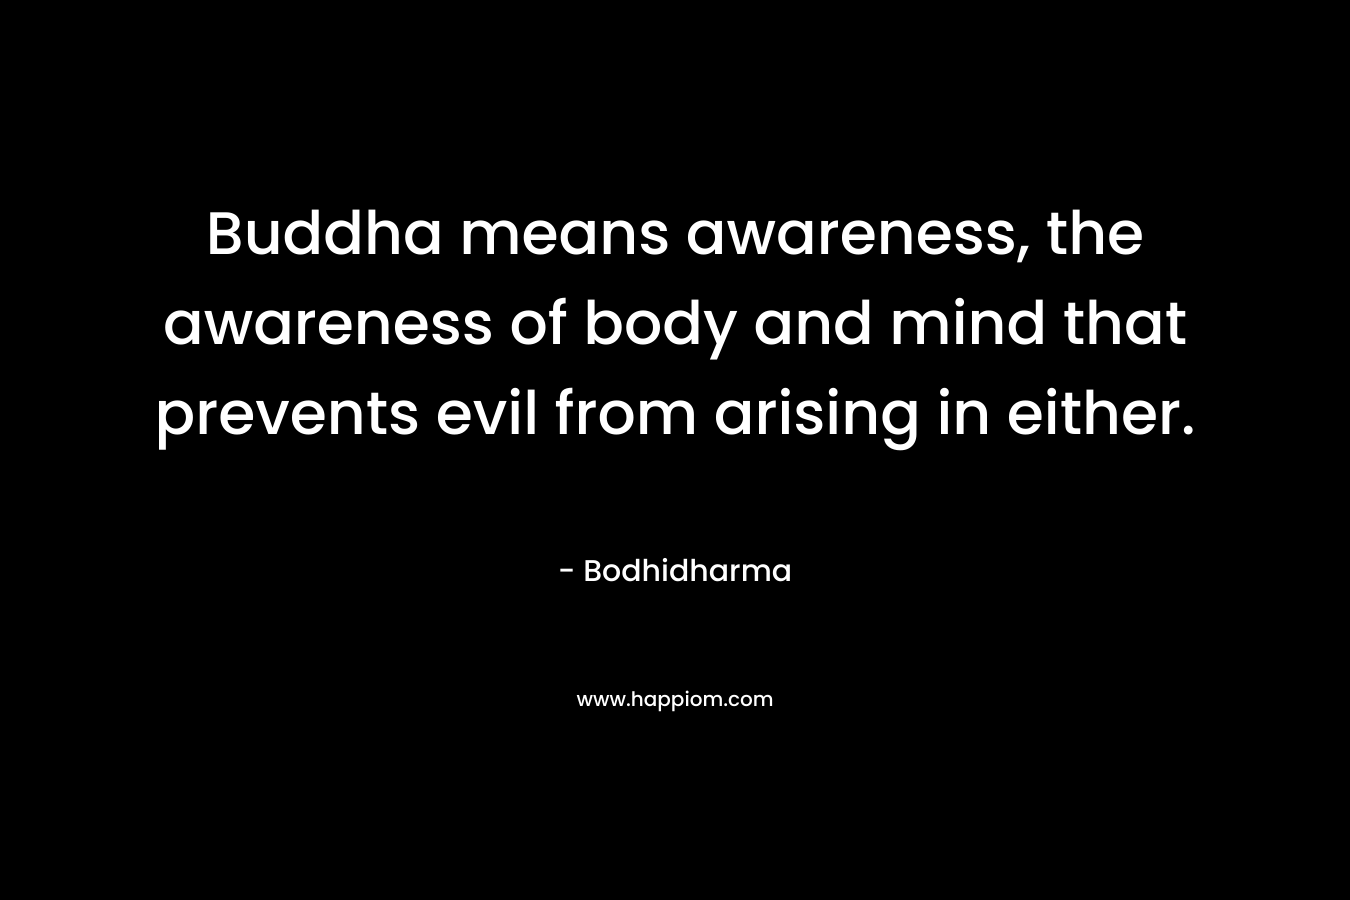 Buddha means awareness, the awareness of body and mind that prevents evil from arising in either. – Bodhidharma